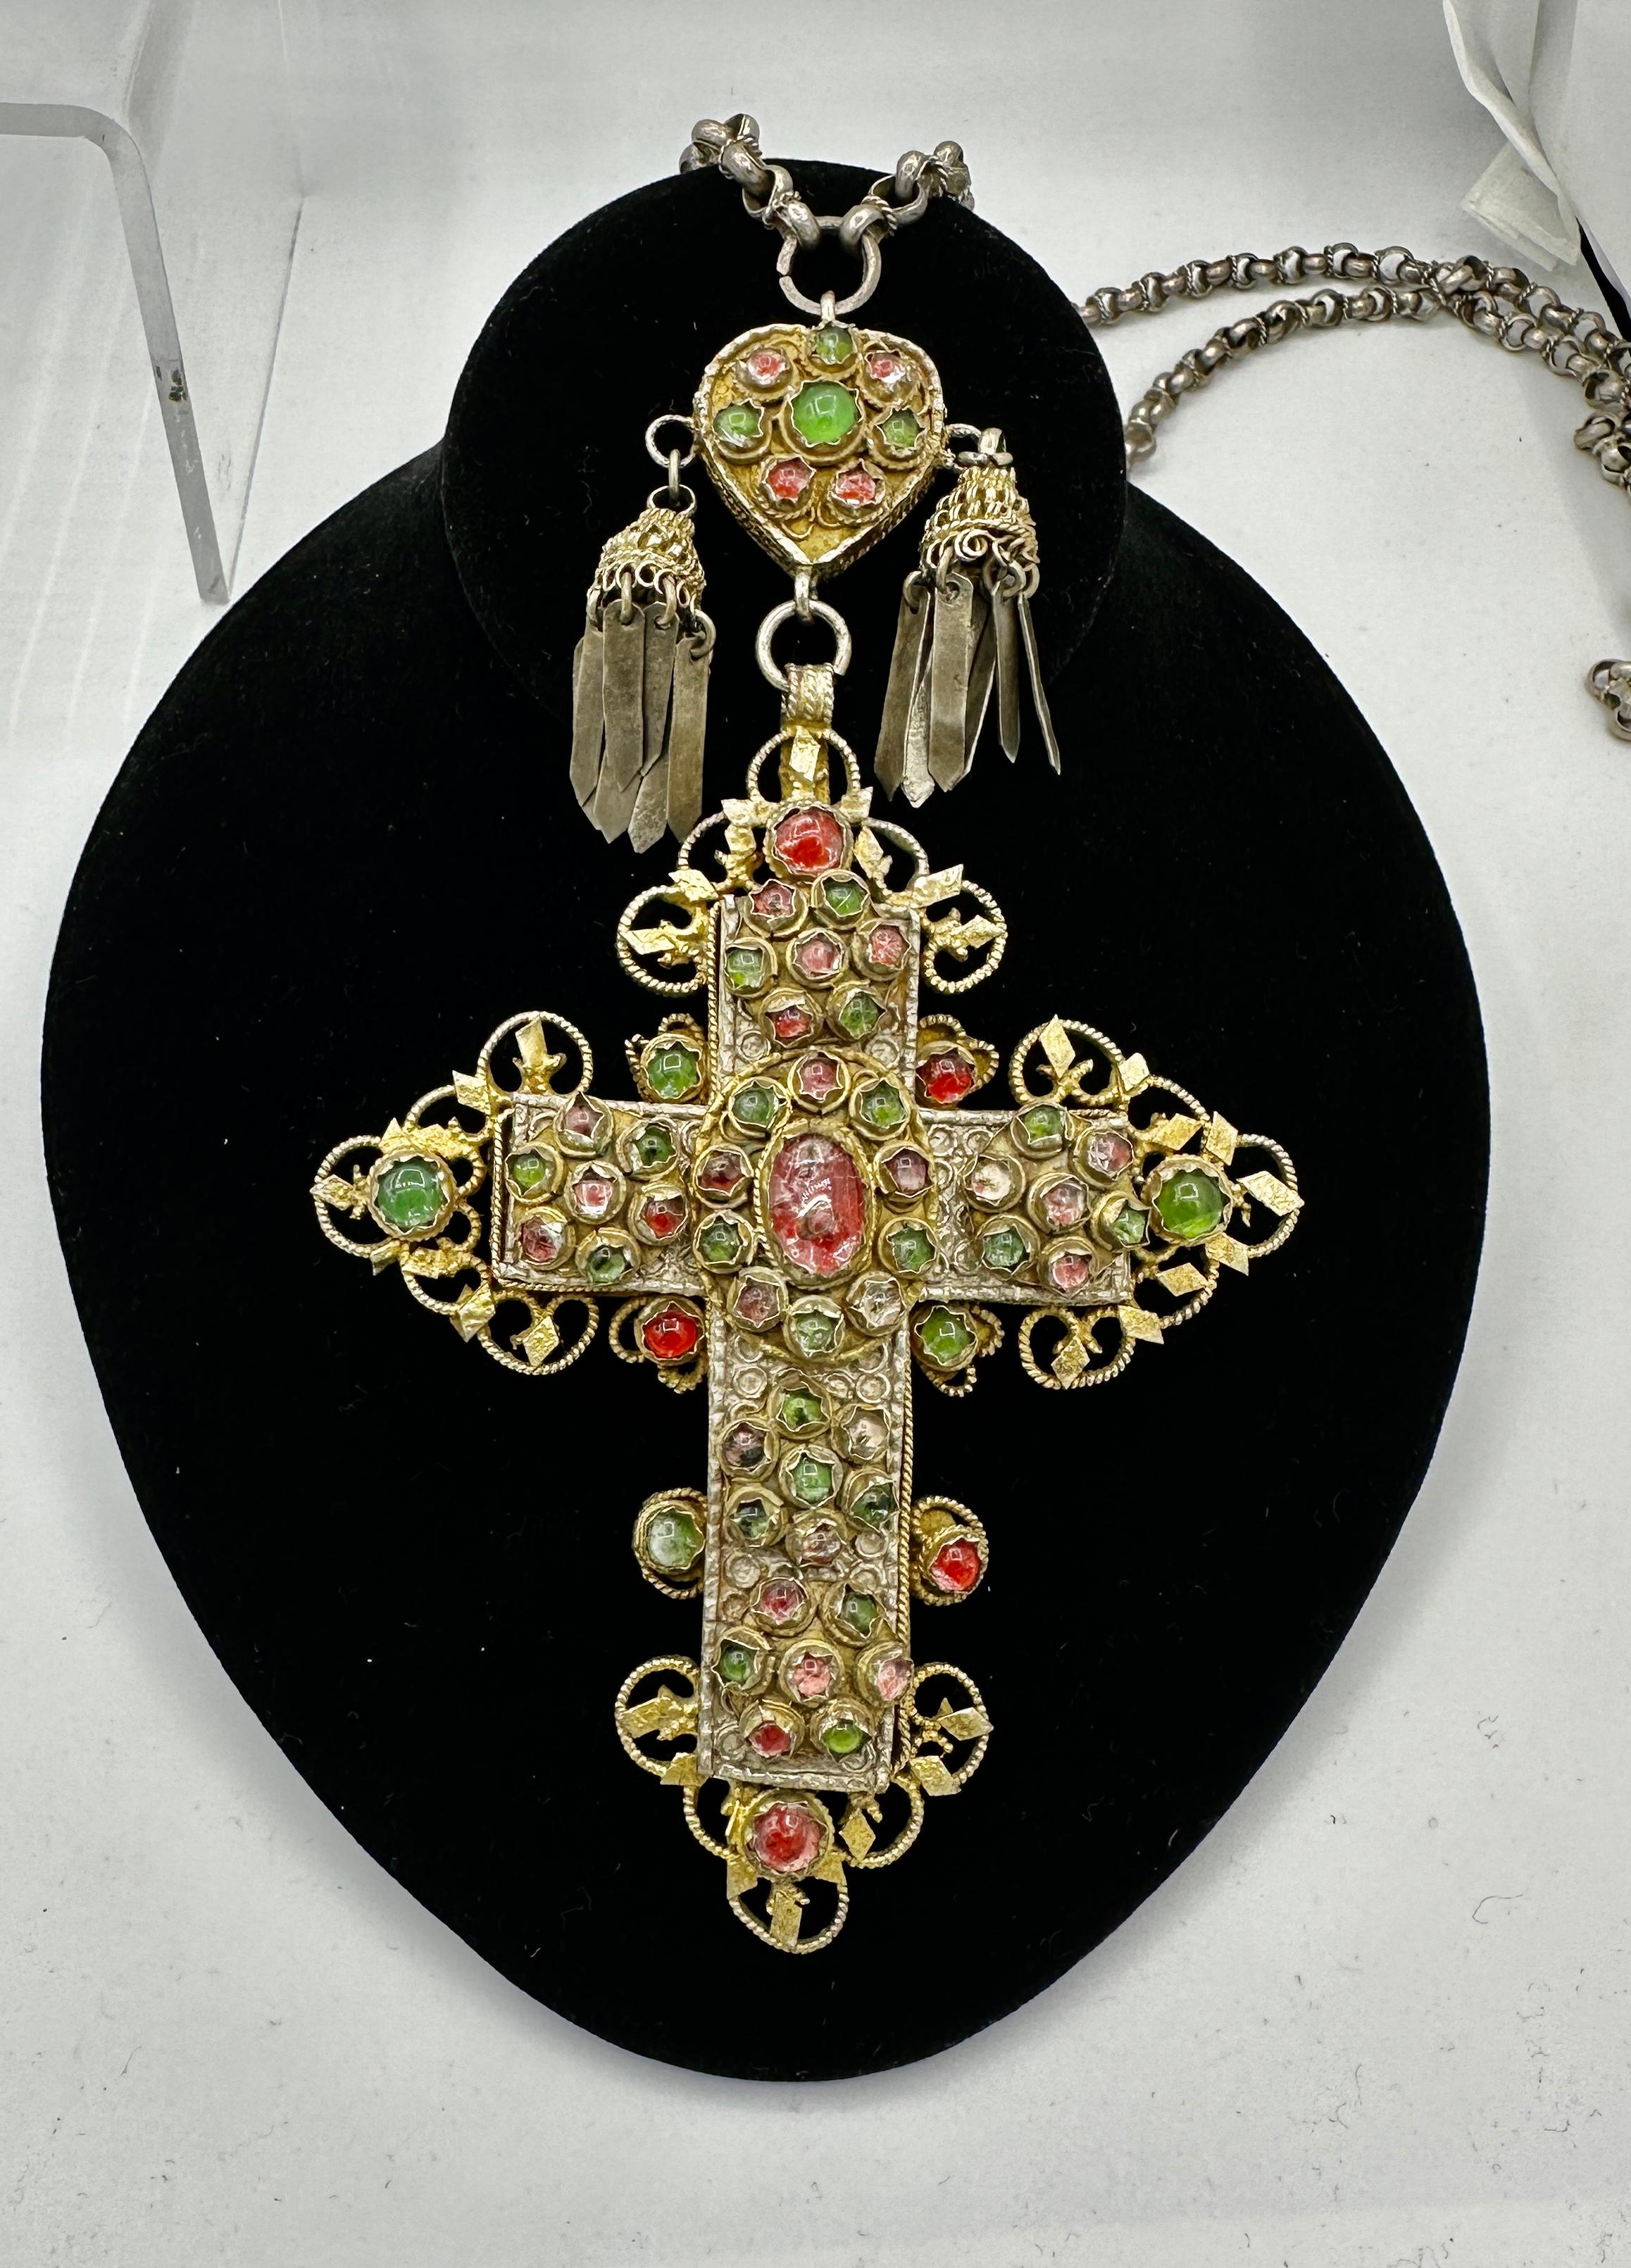 Monumental Jeweled 7 Inch Bishop Cross And Heart Necklace 46 Inch Silver Chain In Excellent Condition For Sale In New York, NY